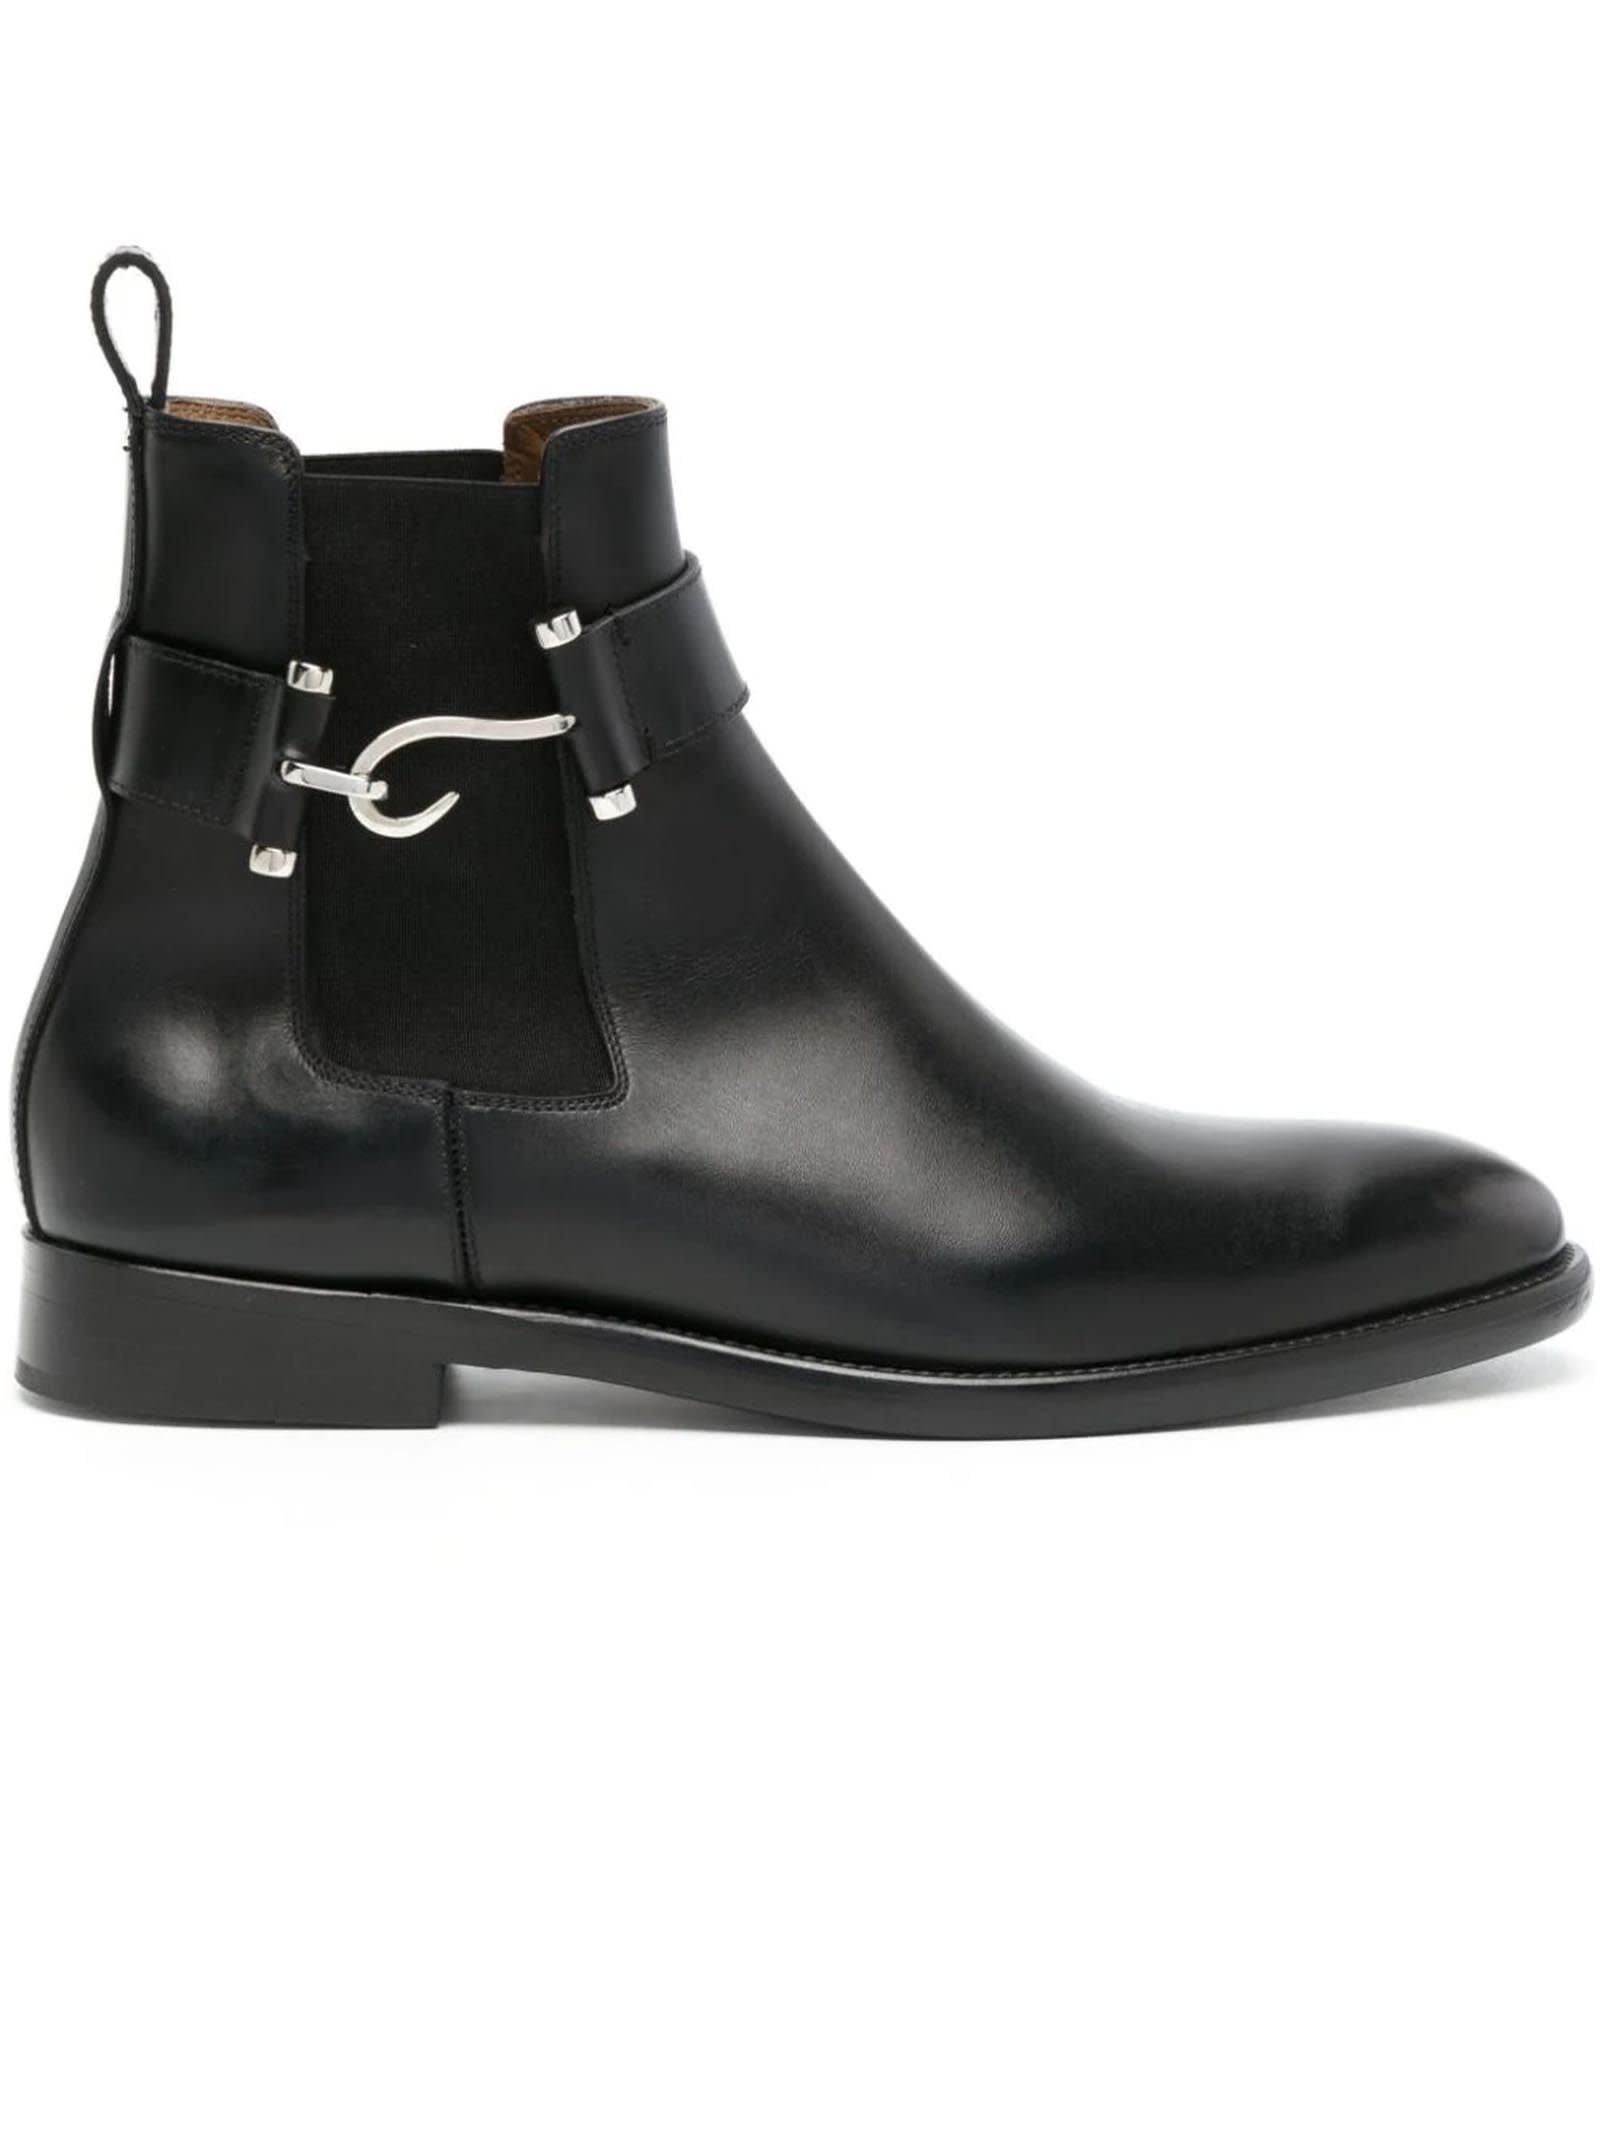 Edhen Milano Black Calf Leather Ankle Boots